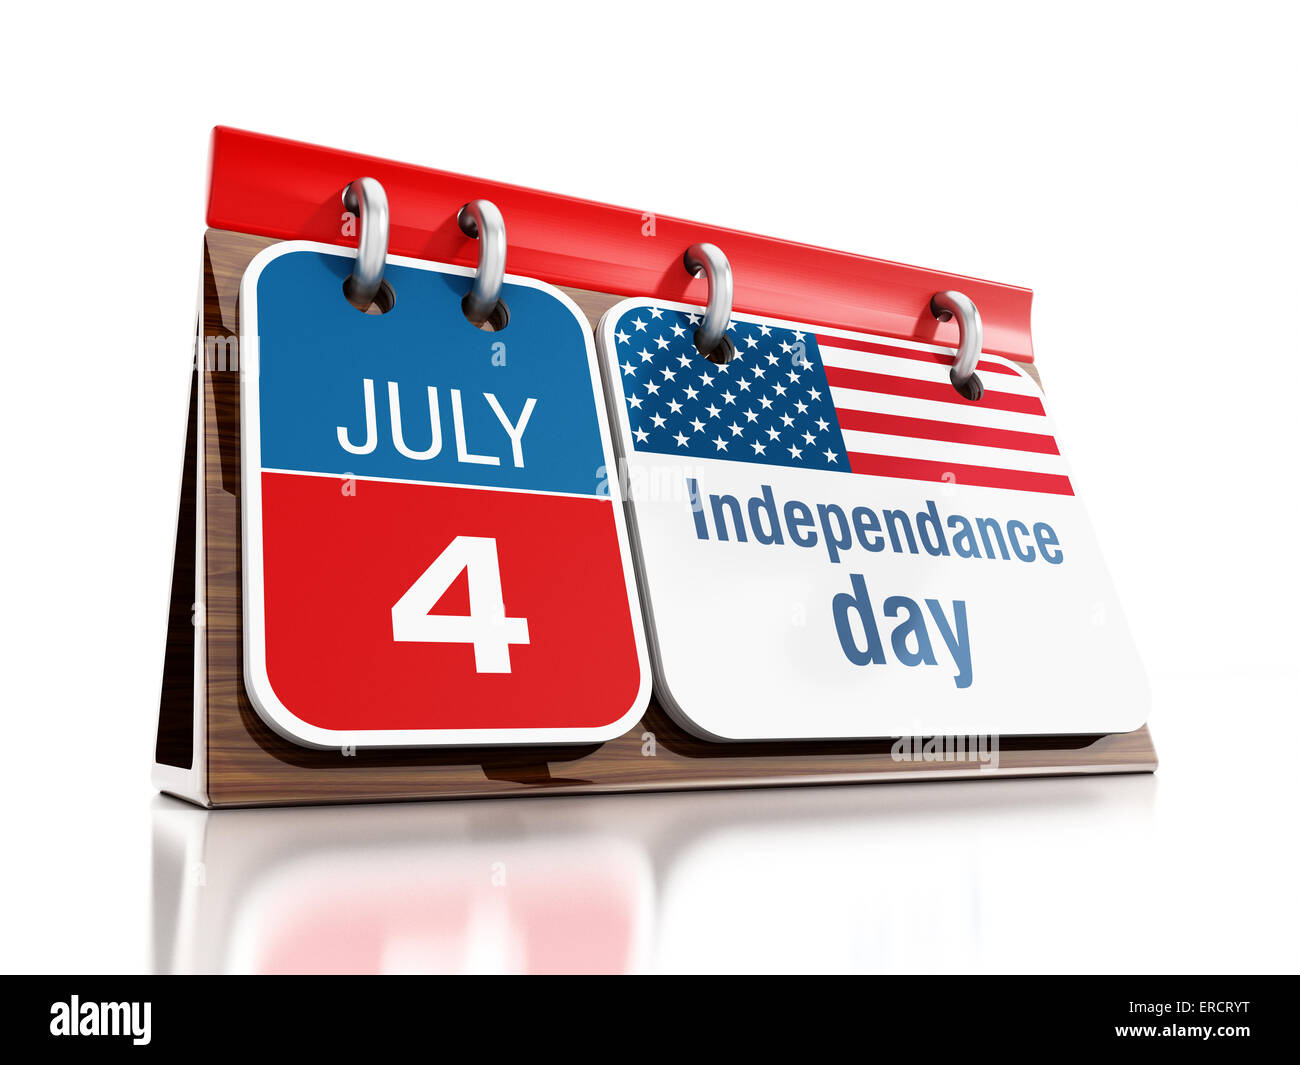 July 4 Independance Day texts on calendar Stock Photo